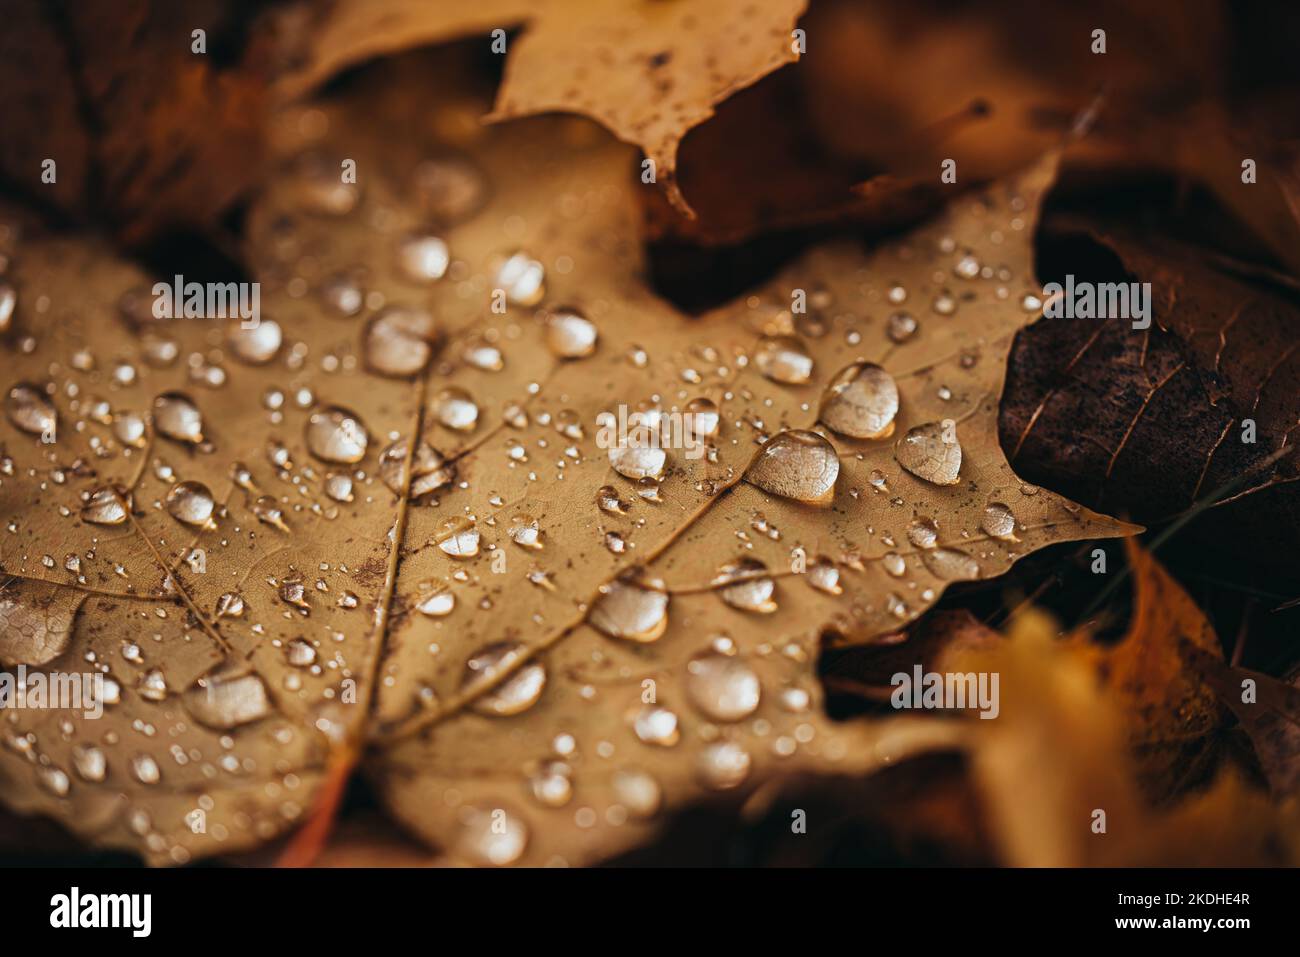 Close up of fallen leaf on ground in autumn covered in raindrops. Stock Photo